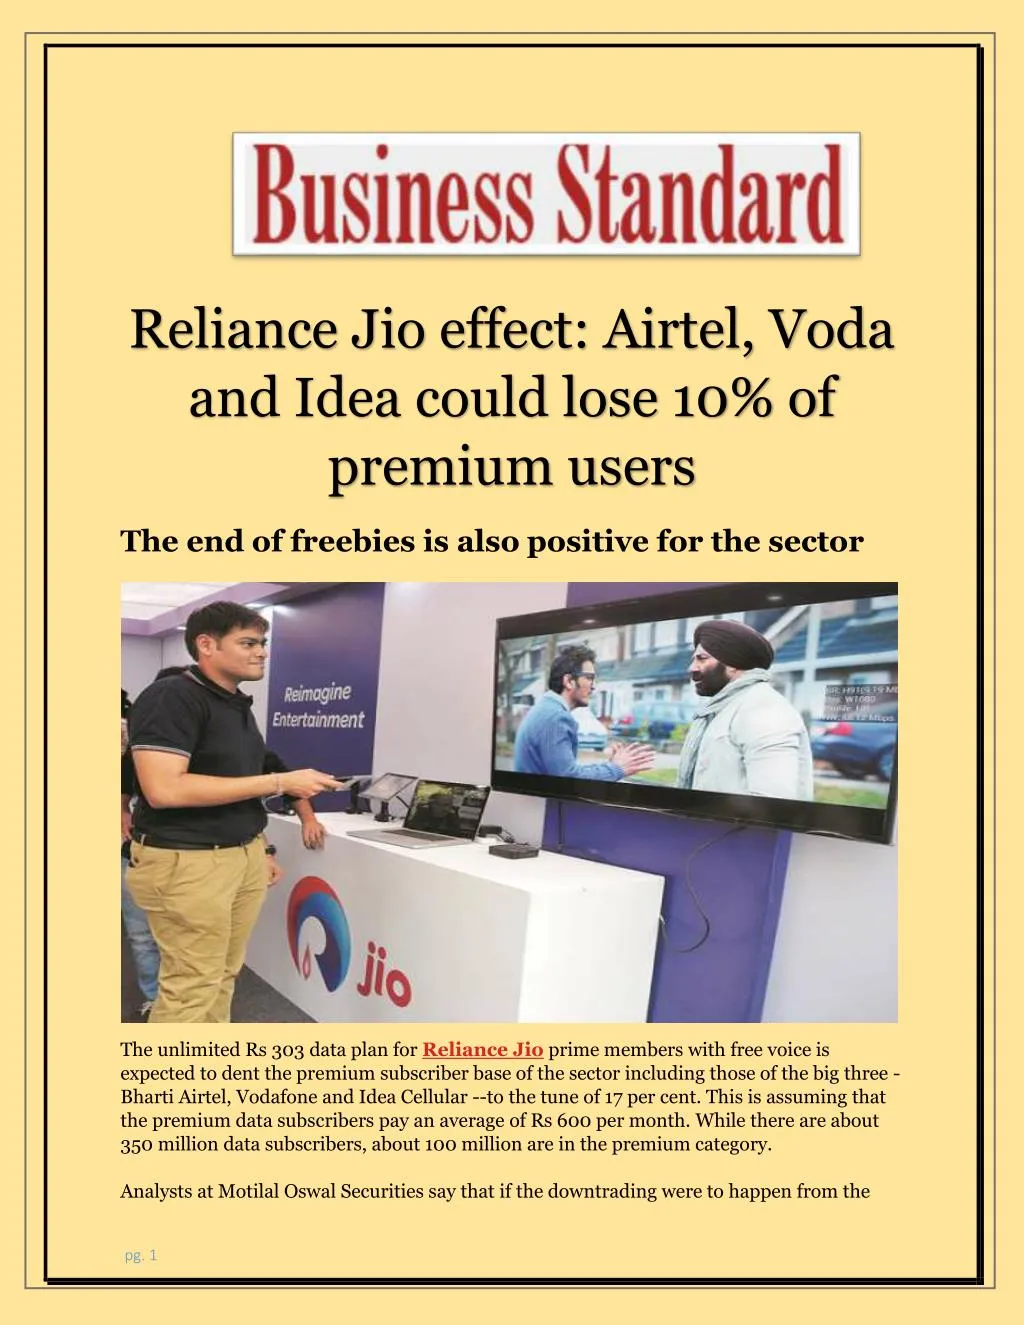 reliance jio effect airtel voda and idea could